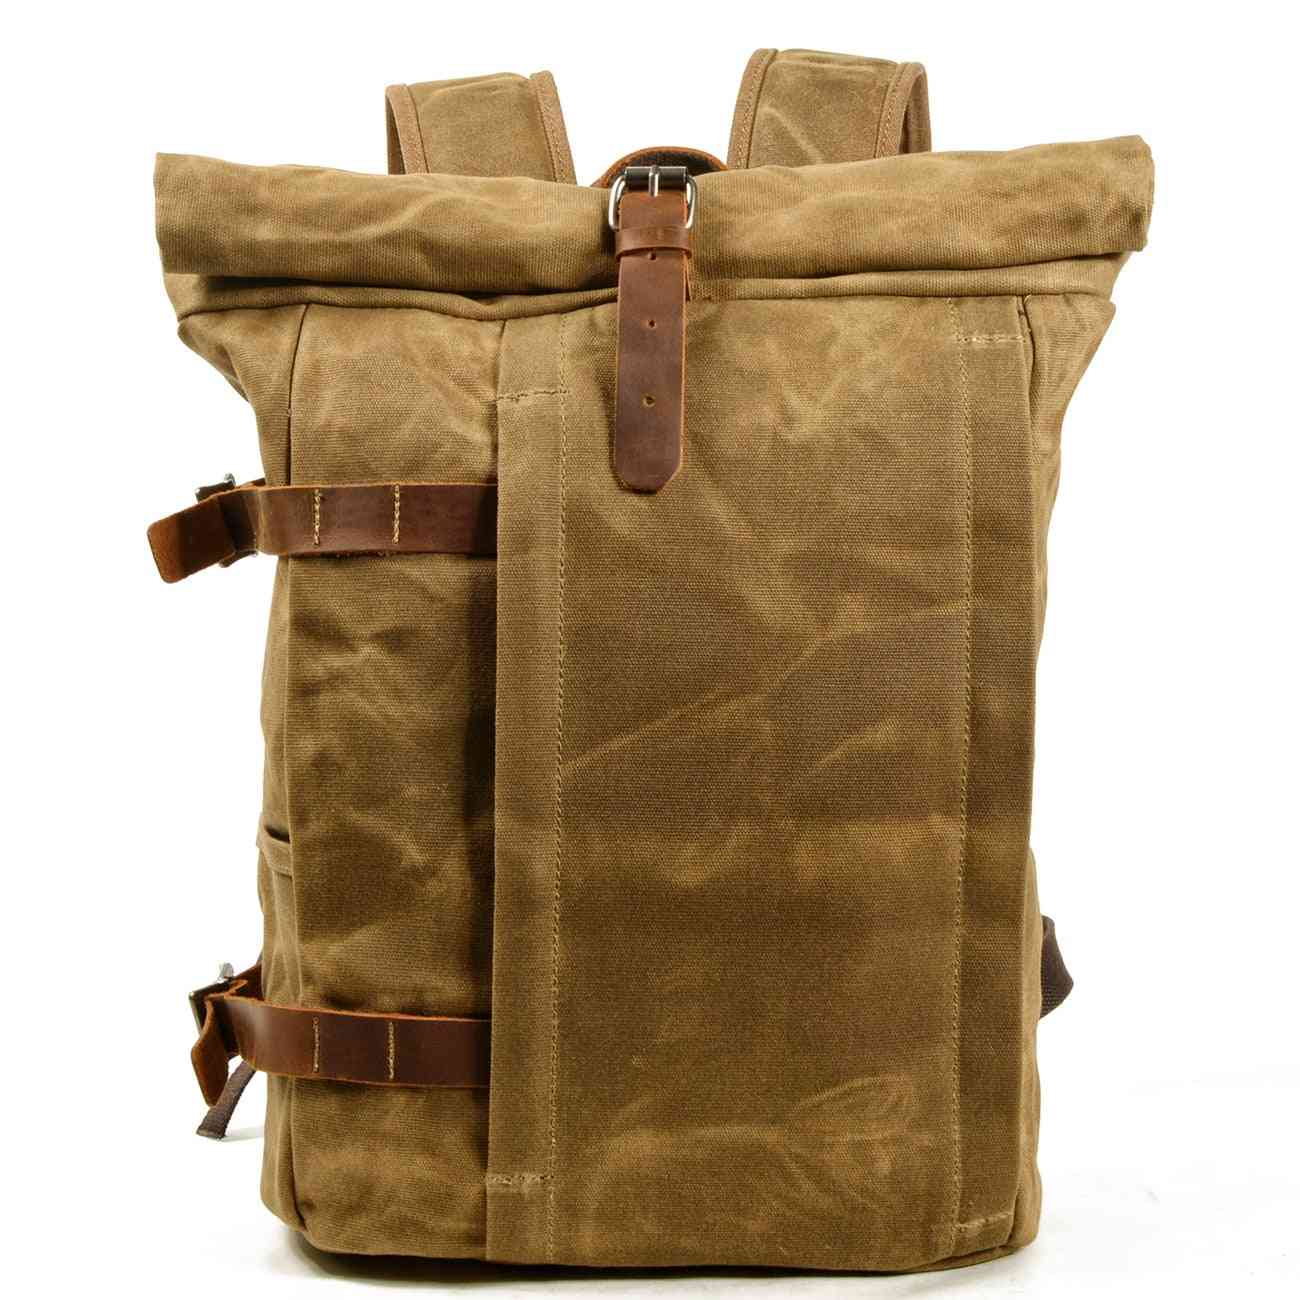 Outdoor- Fashion Student Backpack, Leisure Computer Bag